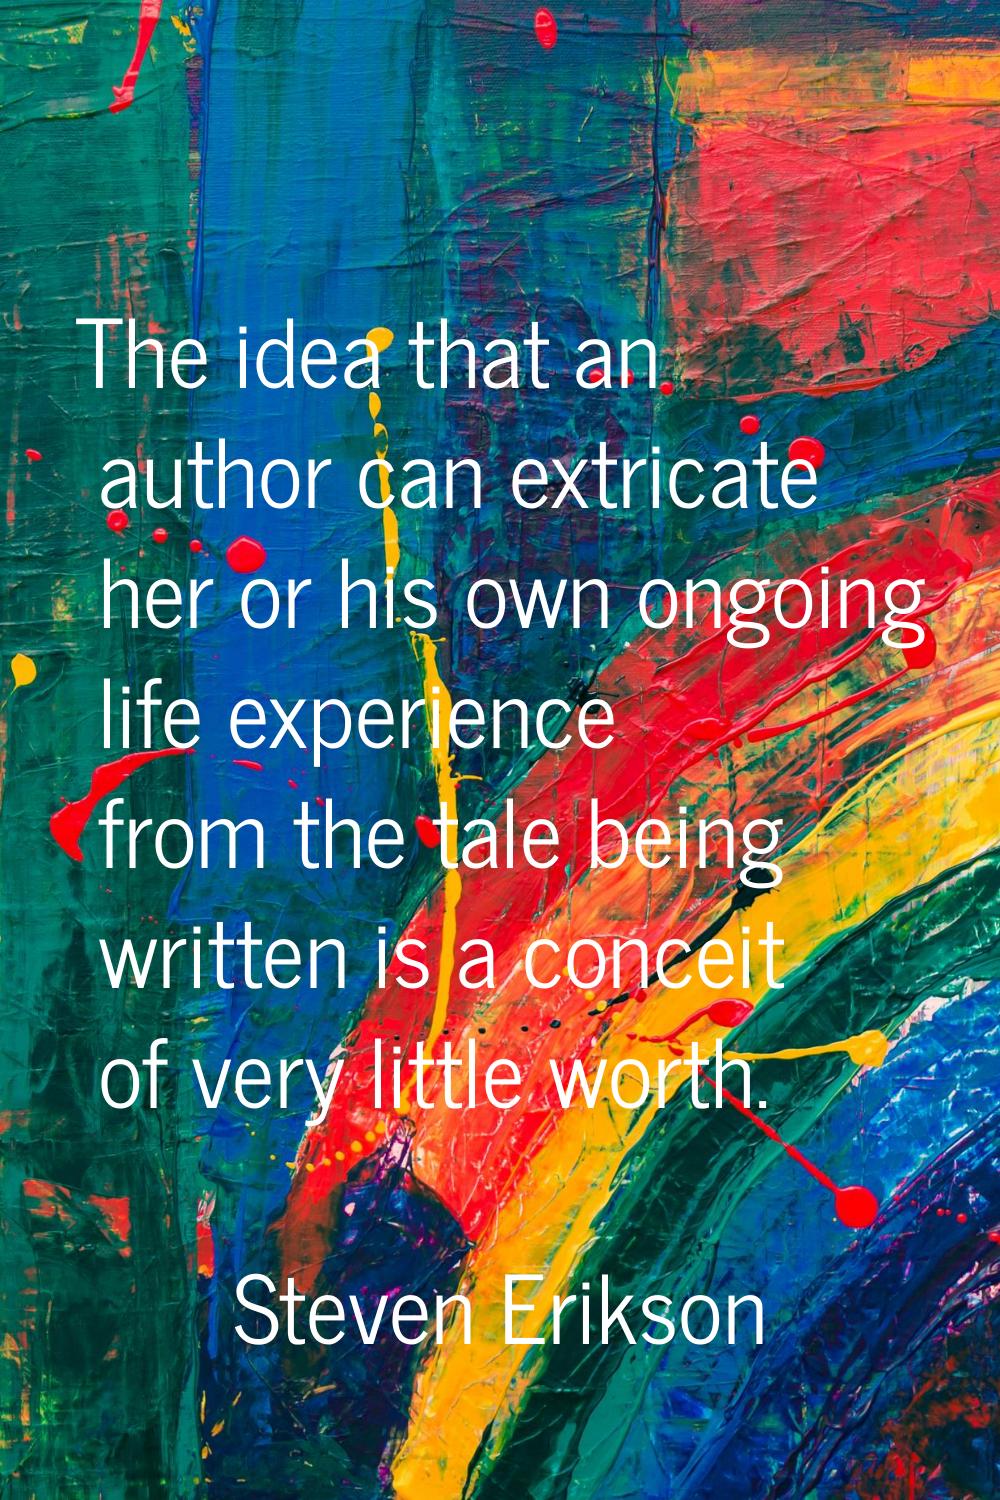 The idea that an author can extricate her or his own ongoing life experience from the tale being wr